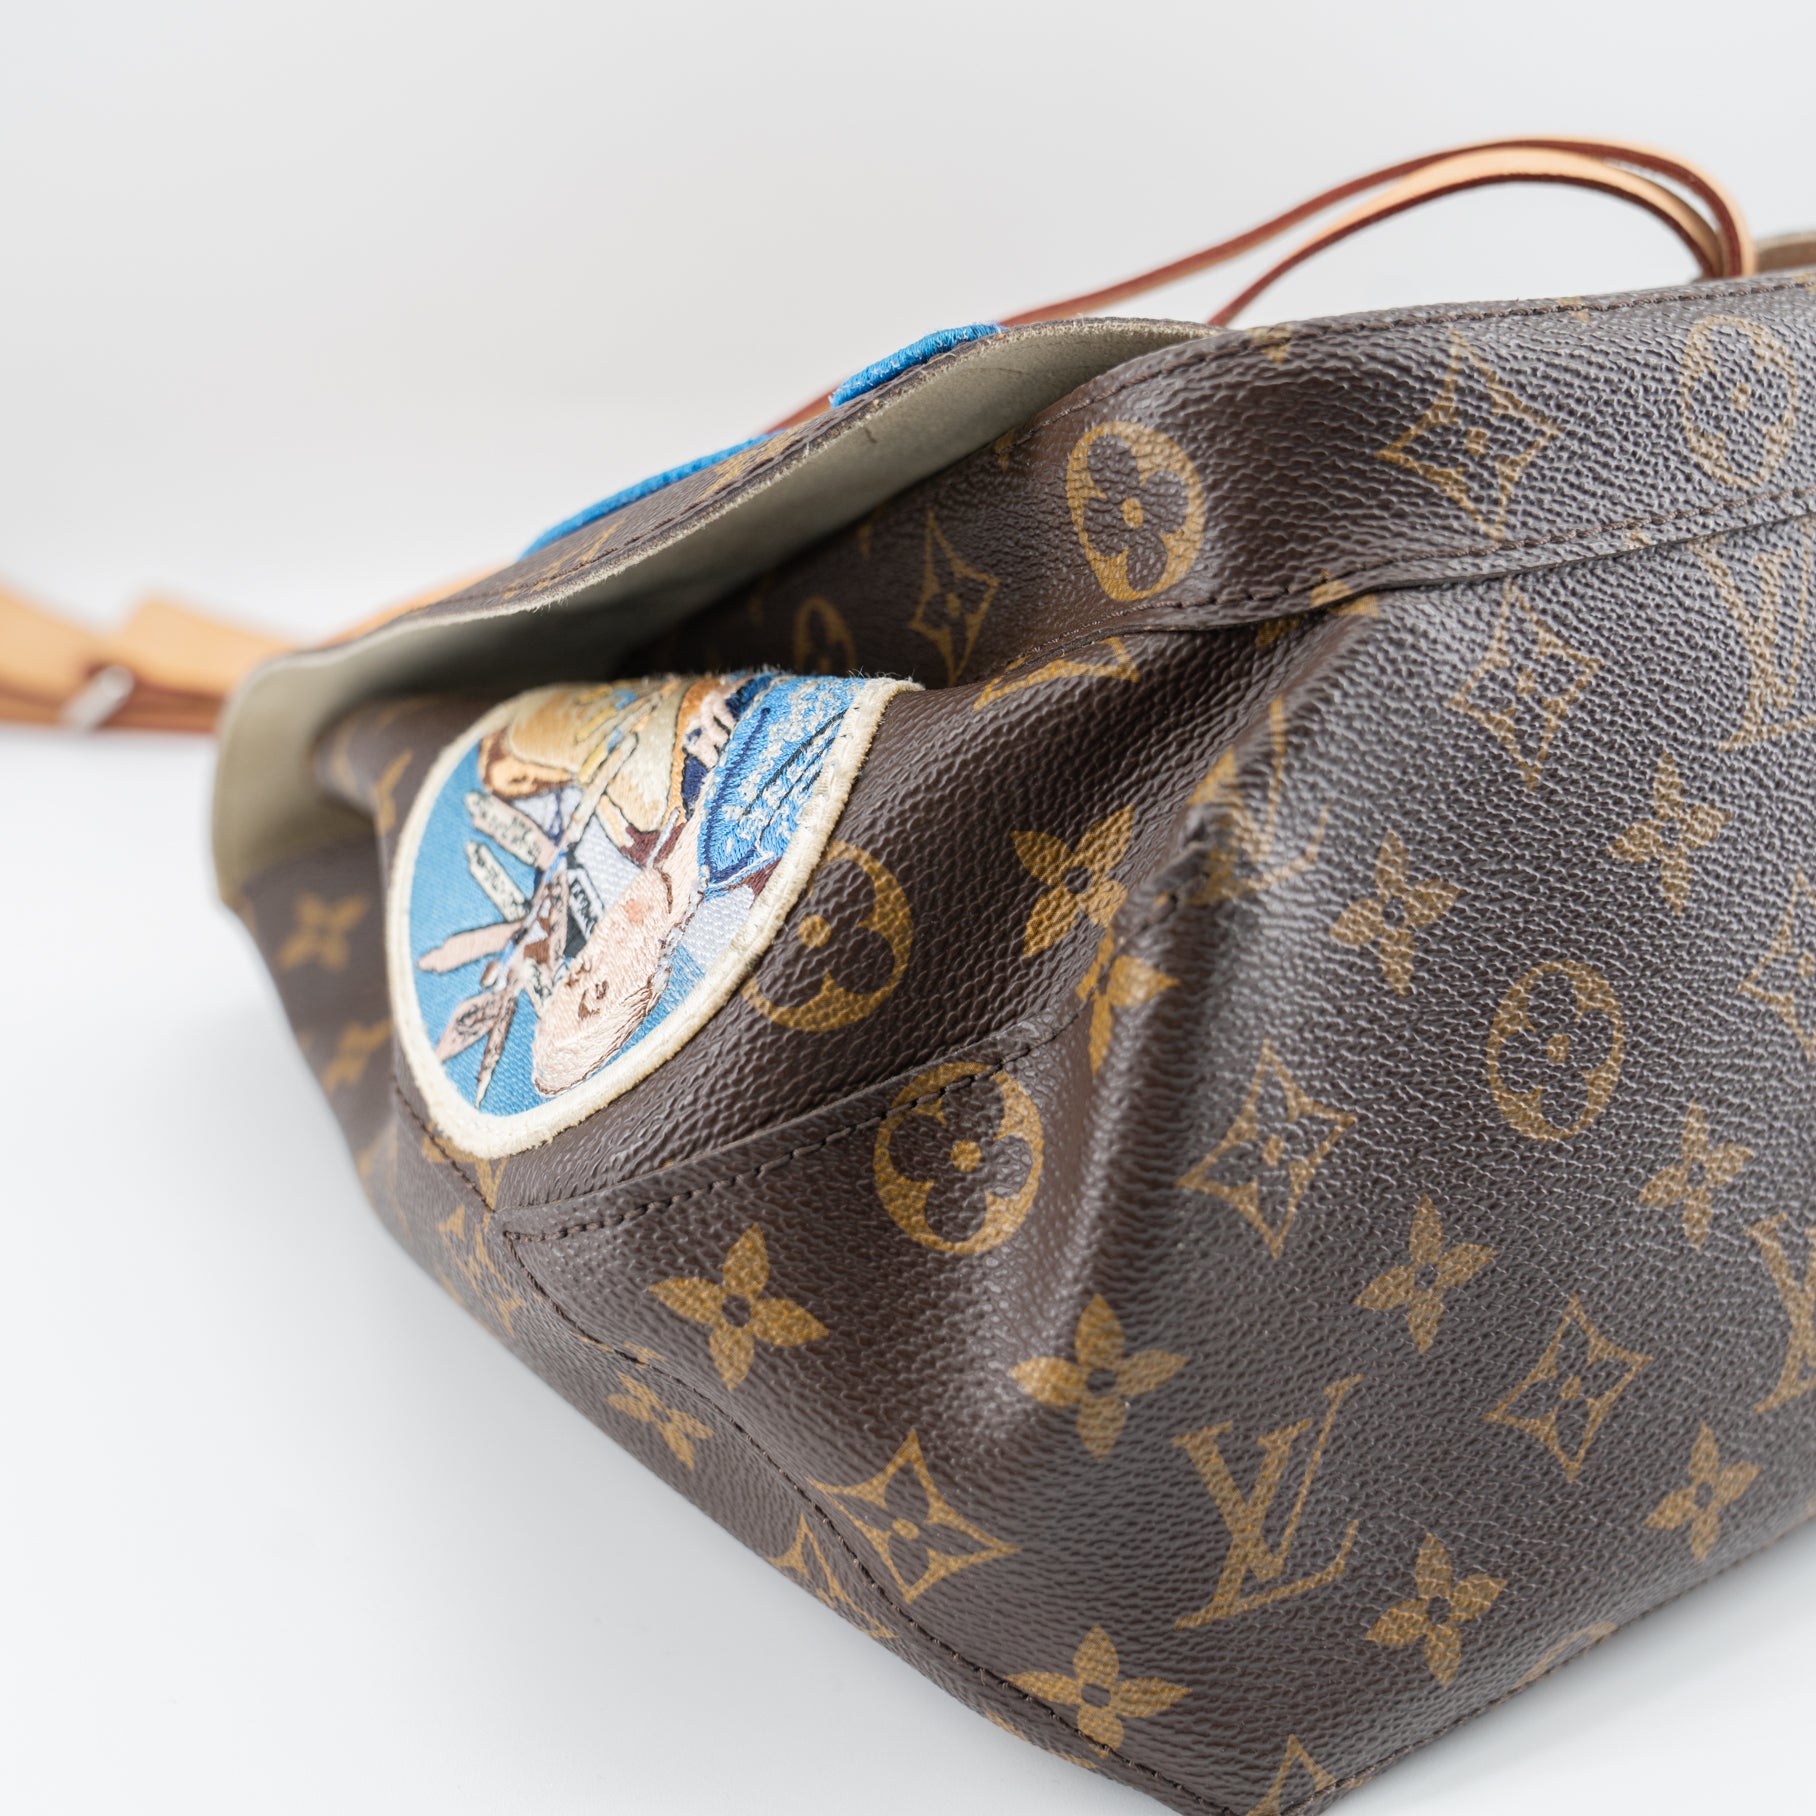 Cindy Sherman created a $3,900 limited edition Louis Vuitton